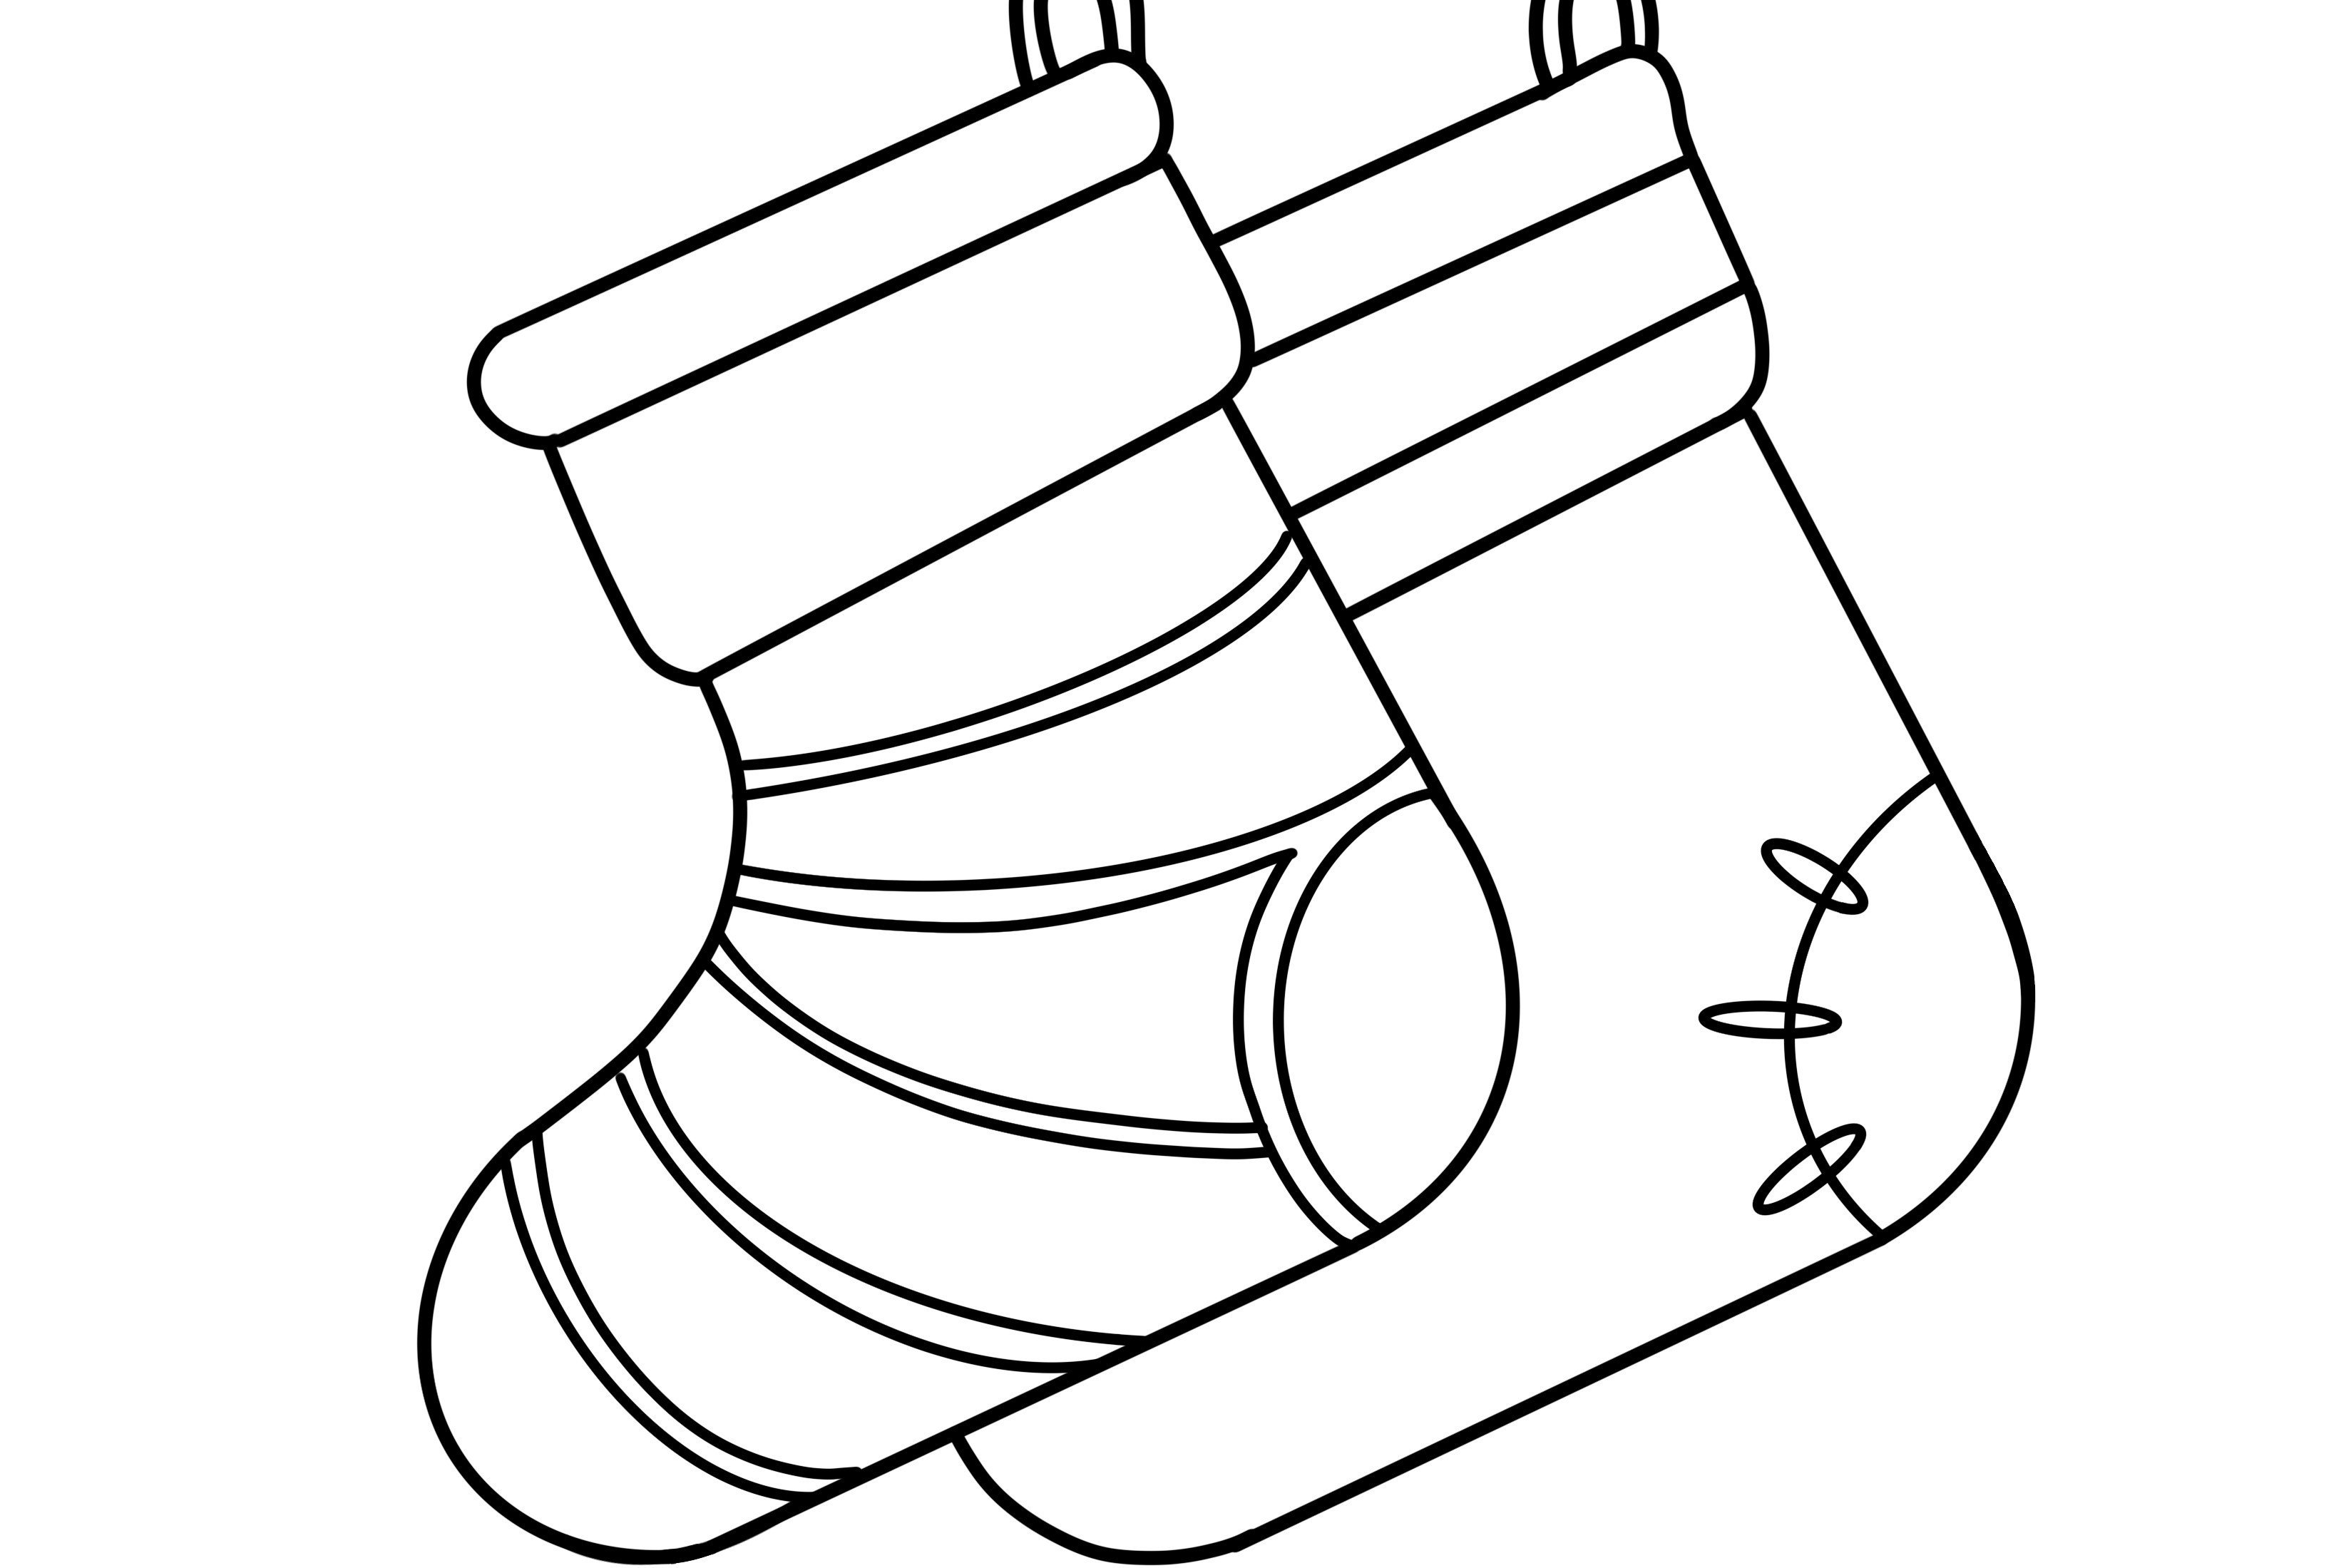 Stocking Christmas Coloring Pages Graphic by waranokdesign99 · Creative ...